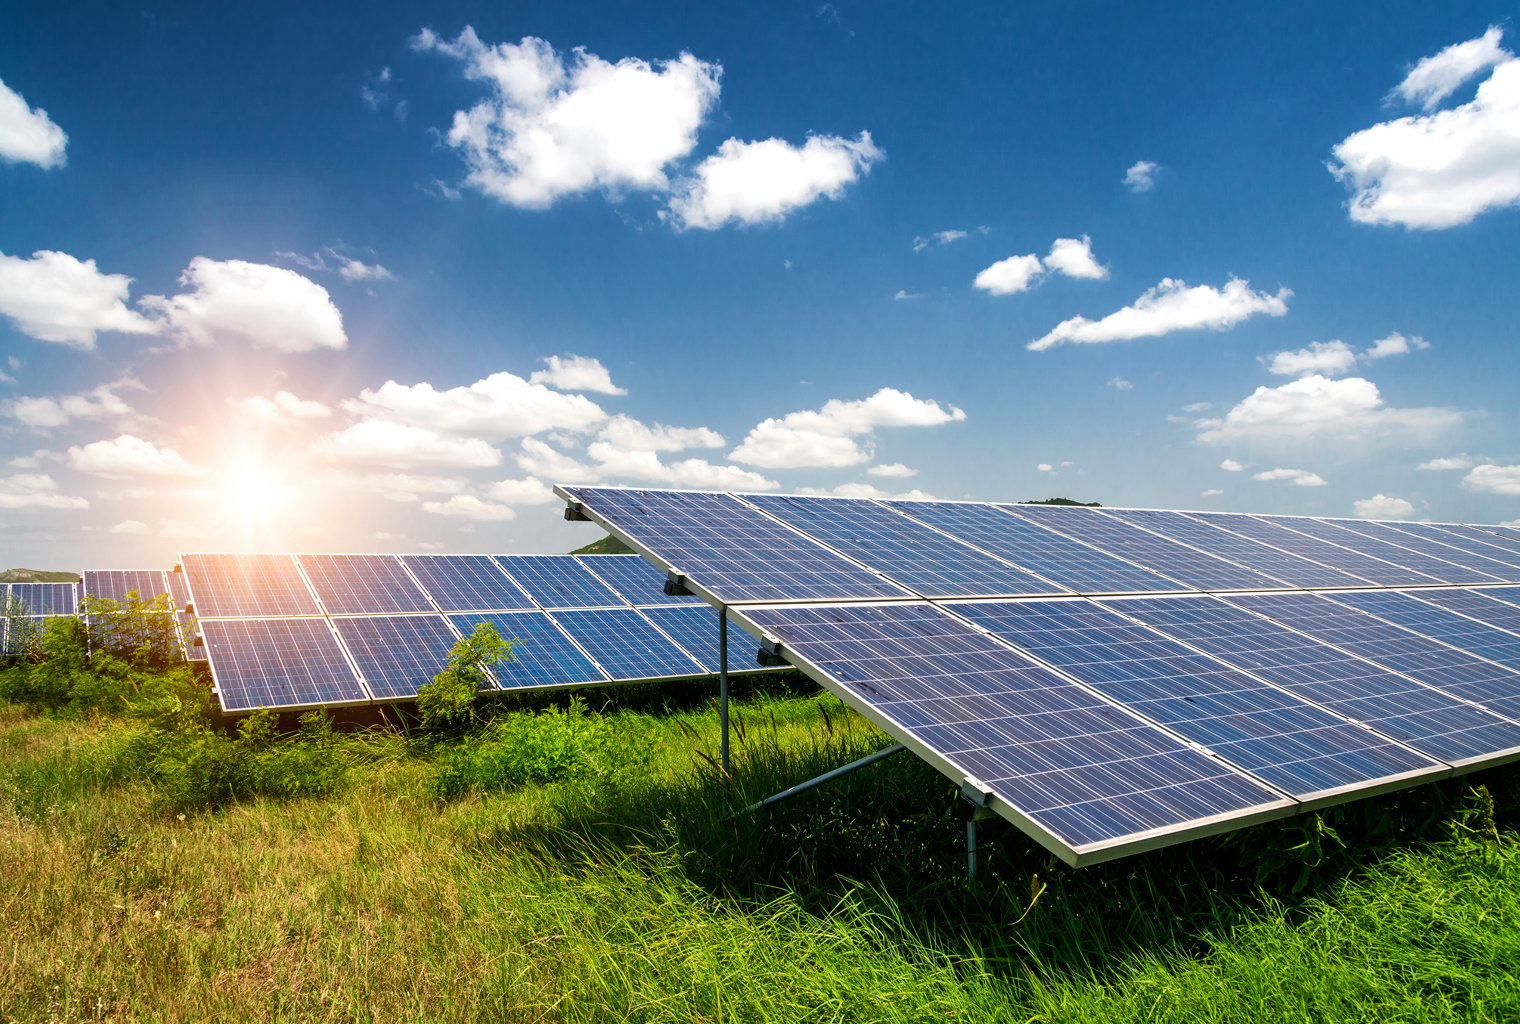 Bitcoin not batteries: converting excess solar power into money | Solid Green Consulting